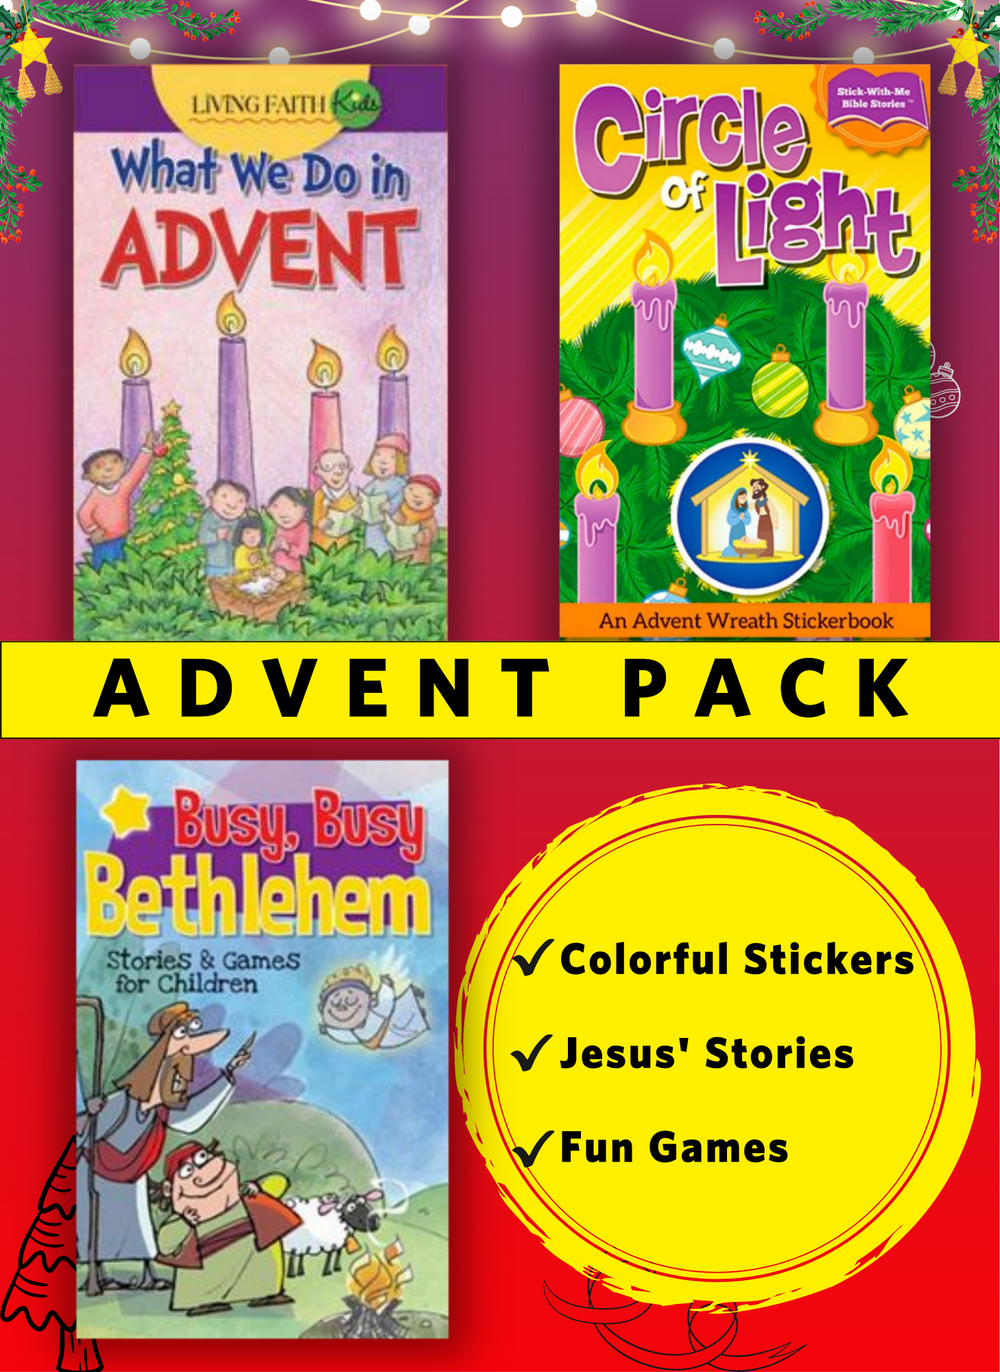 ADVENT PACK